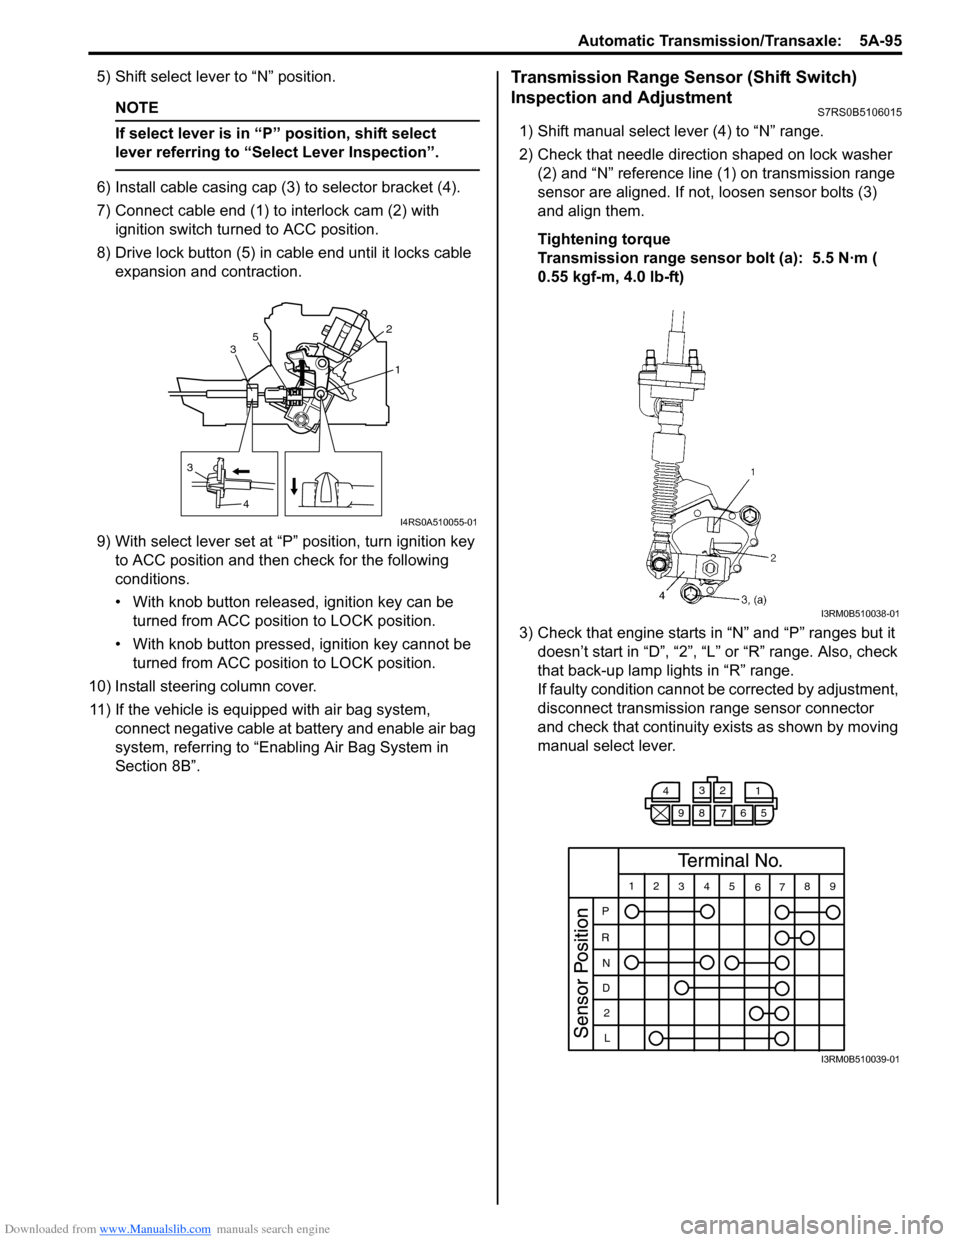 SUZUKI SWIFT 2004 2.G Service Workshop Manual Downloaded from www.Manualslib.com manuals search engine Automatic Transmission/Transaxle:  5A-95
5) Shift select lever to “N” position.
NOTE
If select lever is in “P” position, shift select 
